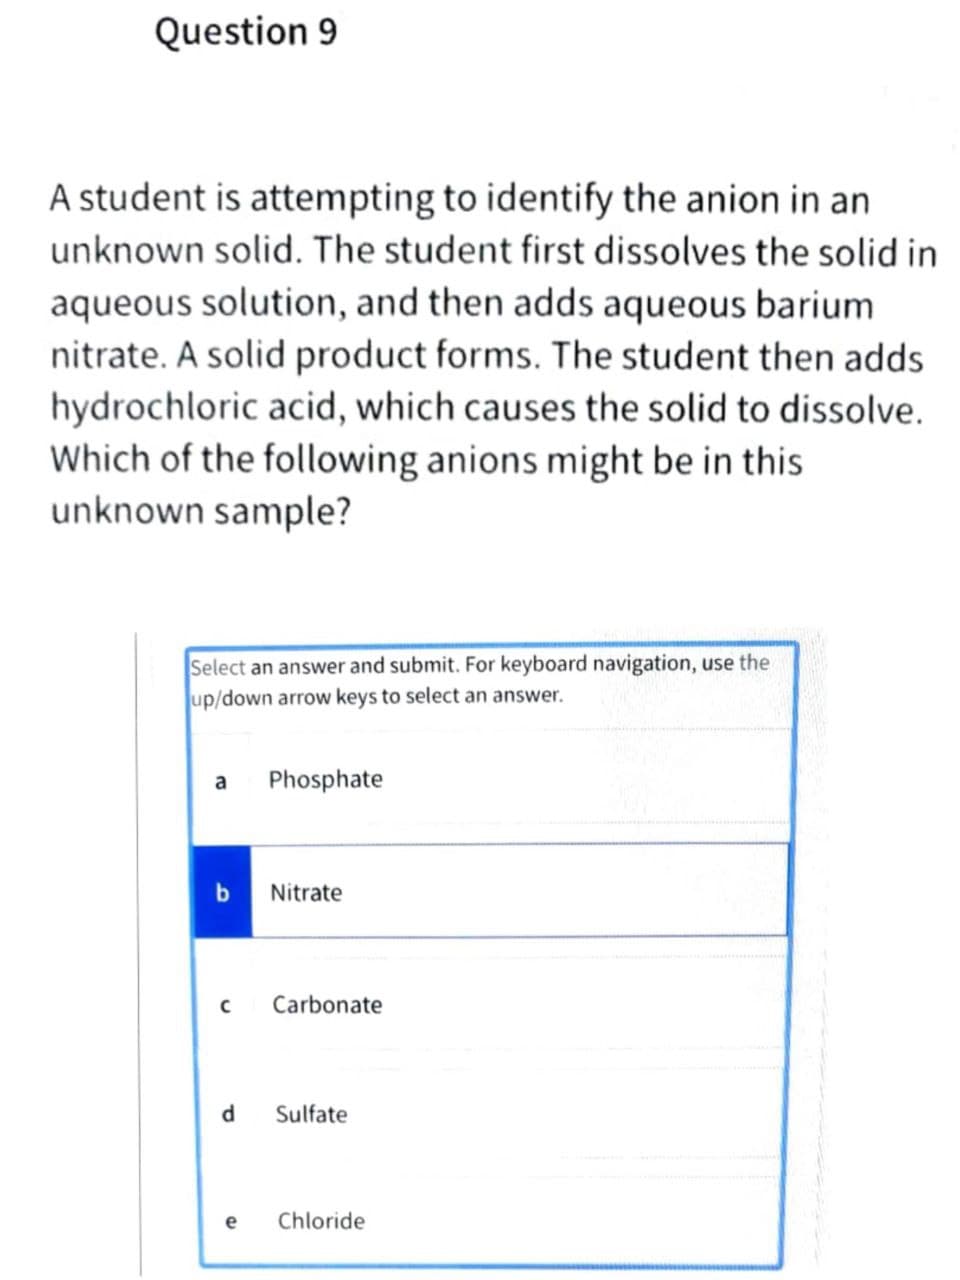 Question 9
A student is attempting to identify the anion in an
unknown solid. The student first dissolves the solid in
aqueous solution, and then adds aqueous barium
nitrate. A solid product forms. The student then adds
hydrochloric acid, which causes the solid to dissolve.
Which of the following anions might be in this
unknown sample?
Select an answer and submit. For keyboard navigation, use the
up/down arrow keys to select an answer.
a
Phosphate
Nitrate
Carbonate
d
Sulfate
e
Chloride
